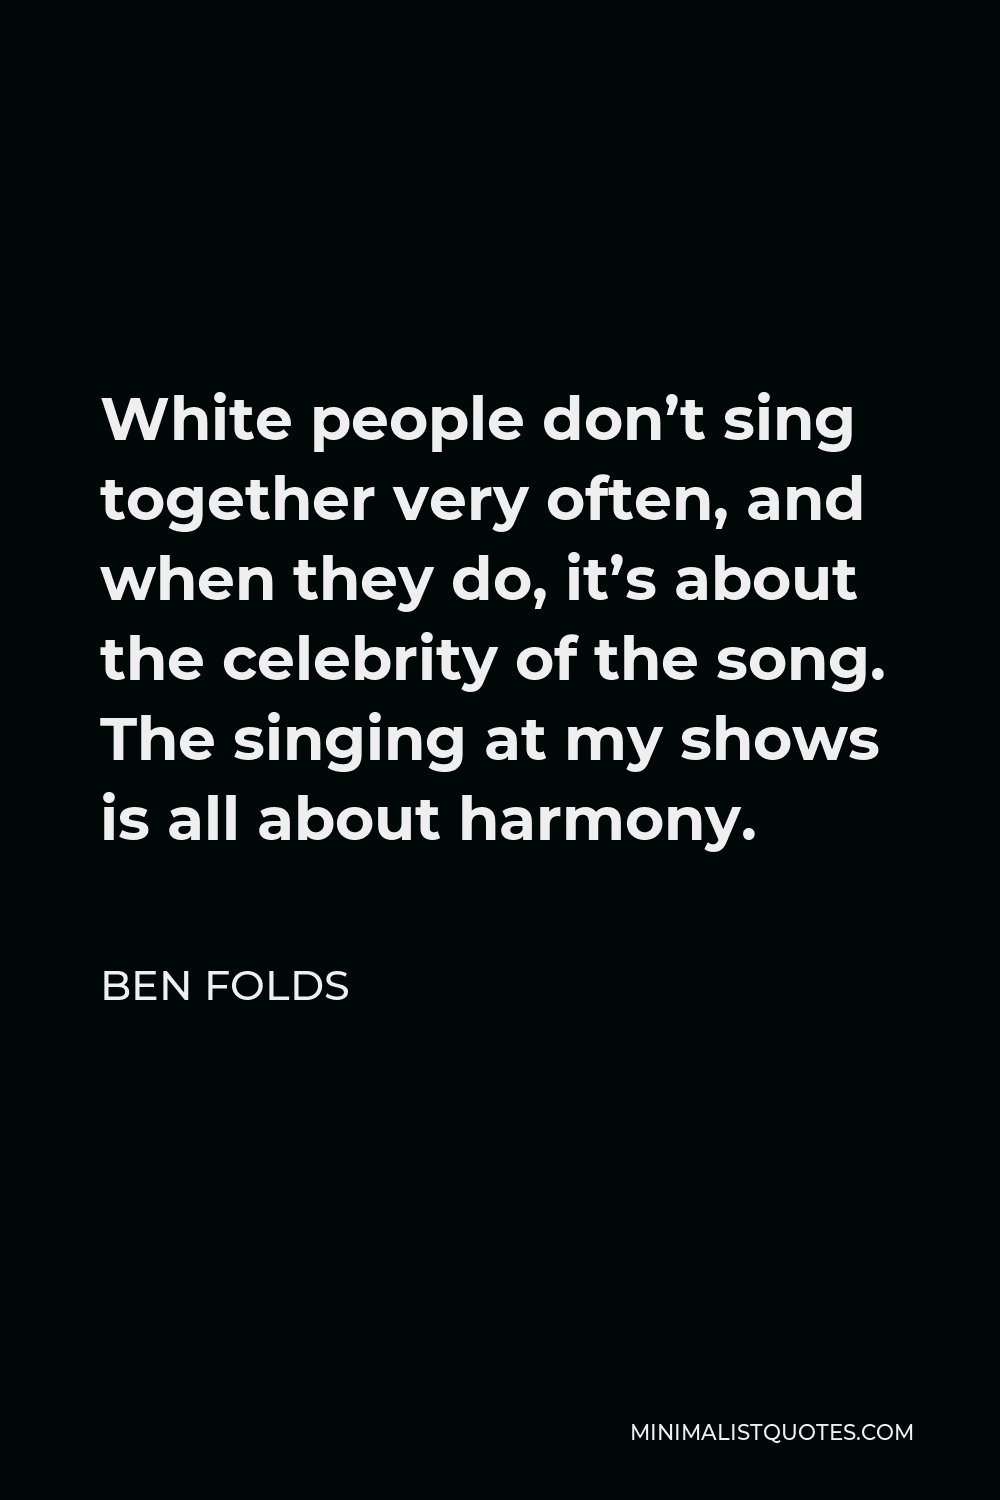 Ben Folds Quote - White people don’t sing together very often, and when they do, it’s about the celebrity of the song. The singing at my shows is all about harmony.